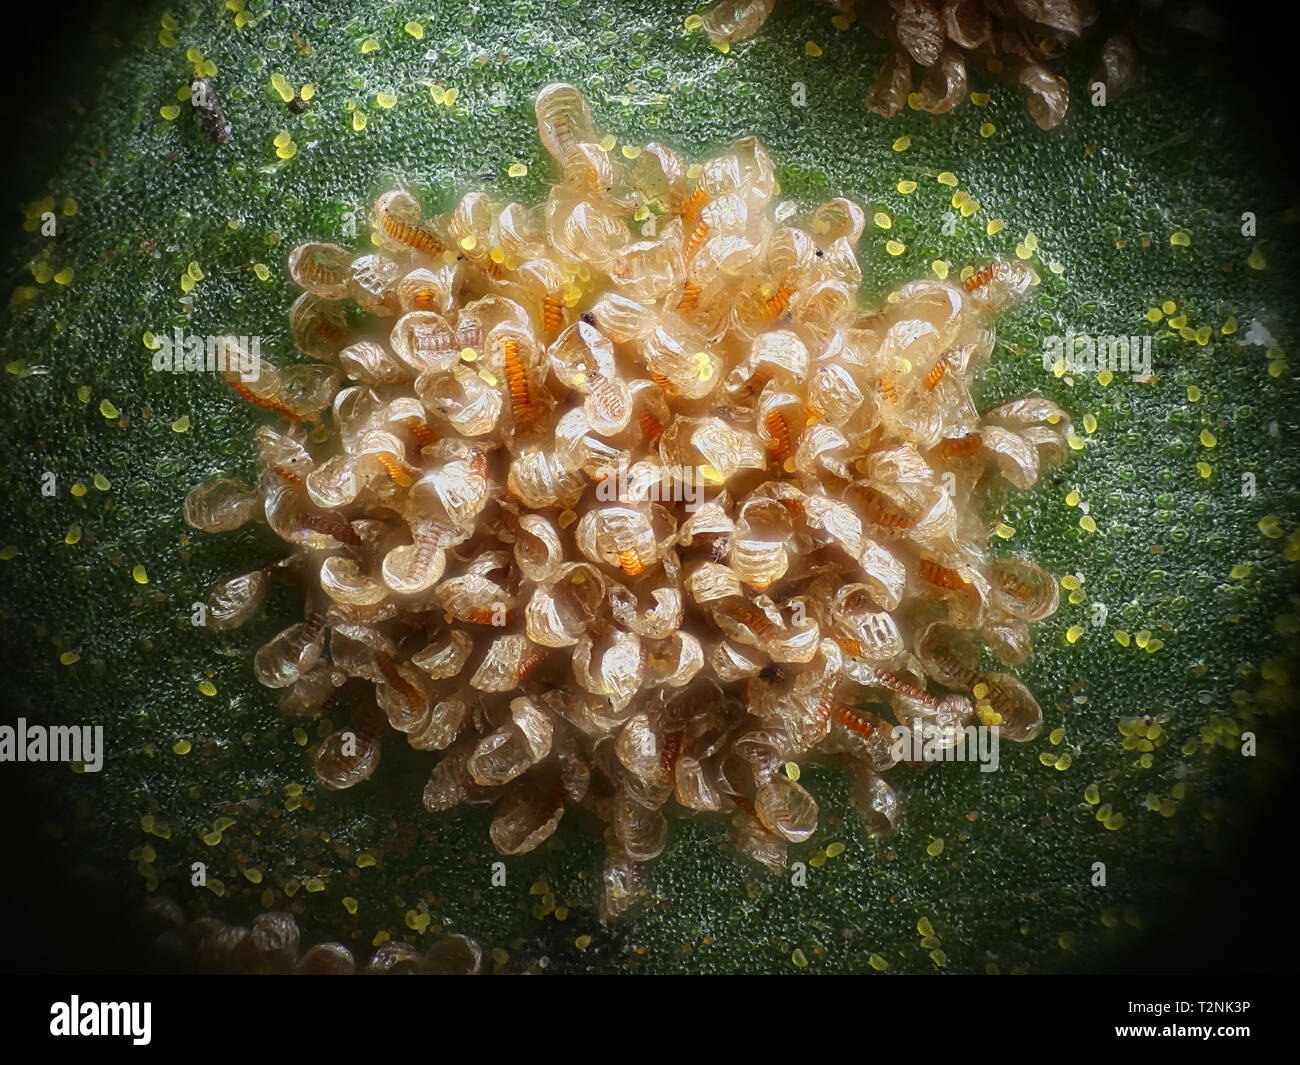 Sorus or a cluster of sporangia of Polypodium vulgare, the common polypody, also called the rockcap fern.  A microscope image. Stock Photo